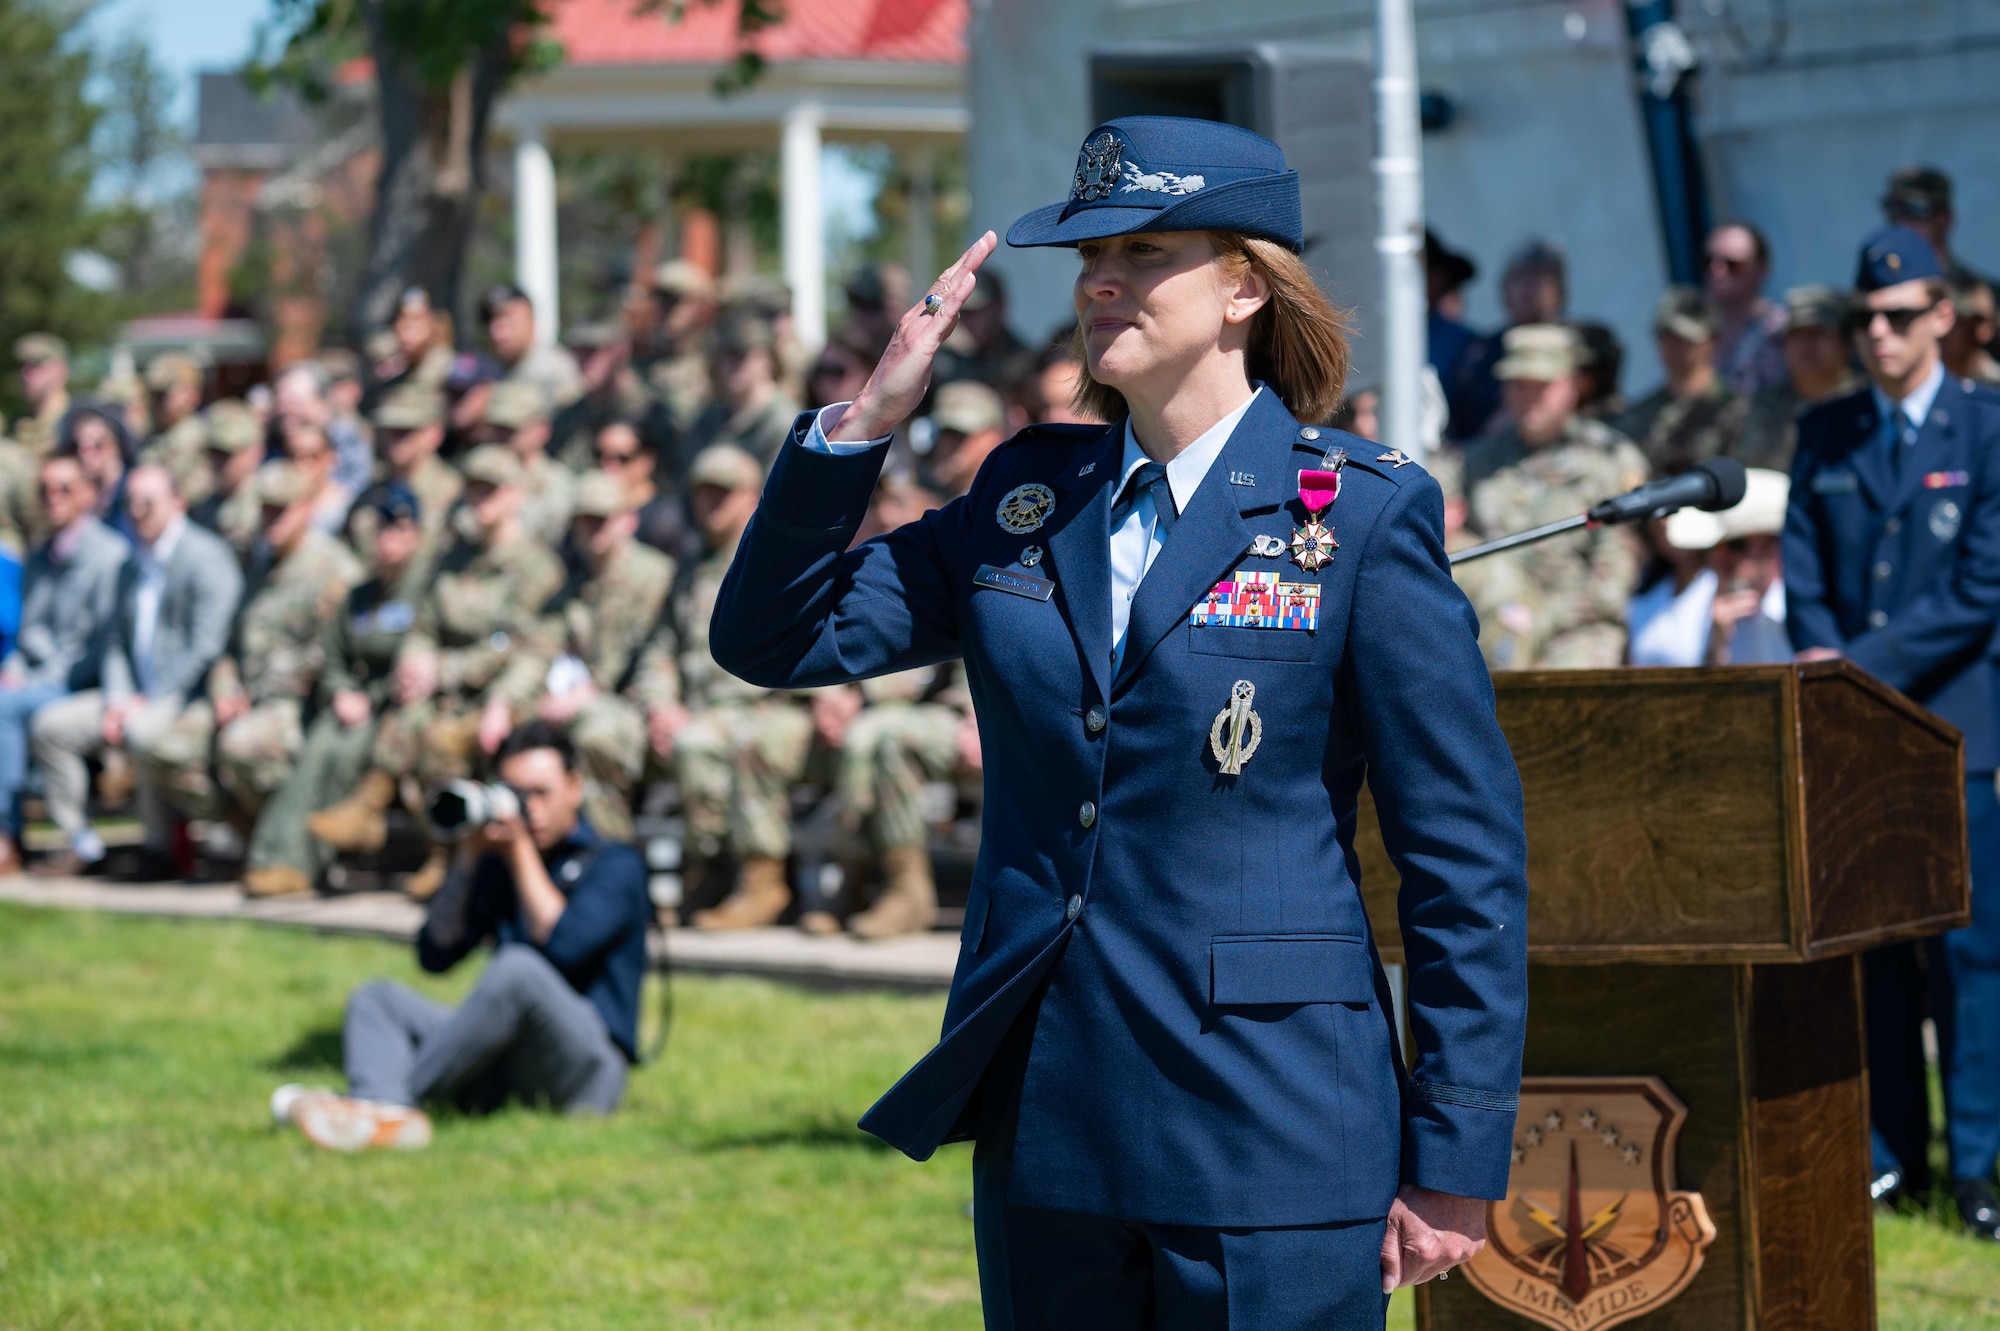 Col. Barrington salutes 90th Missile Wing Airmen.